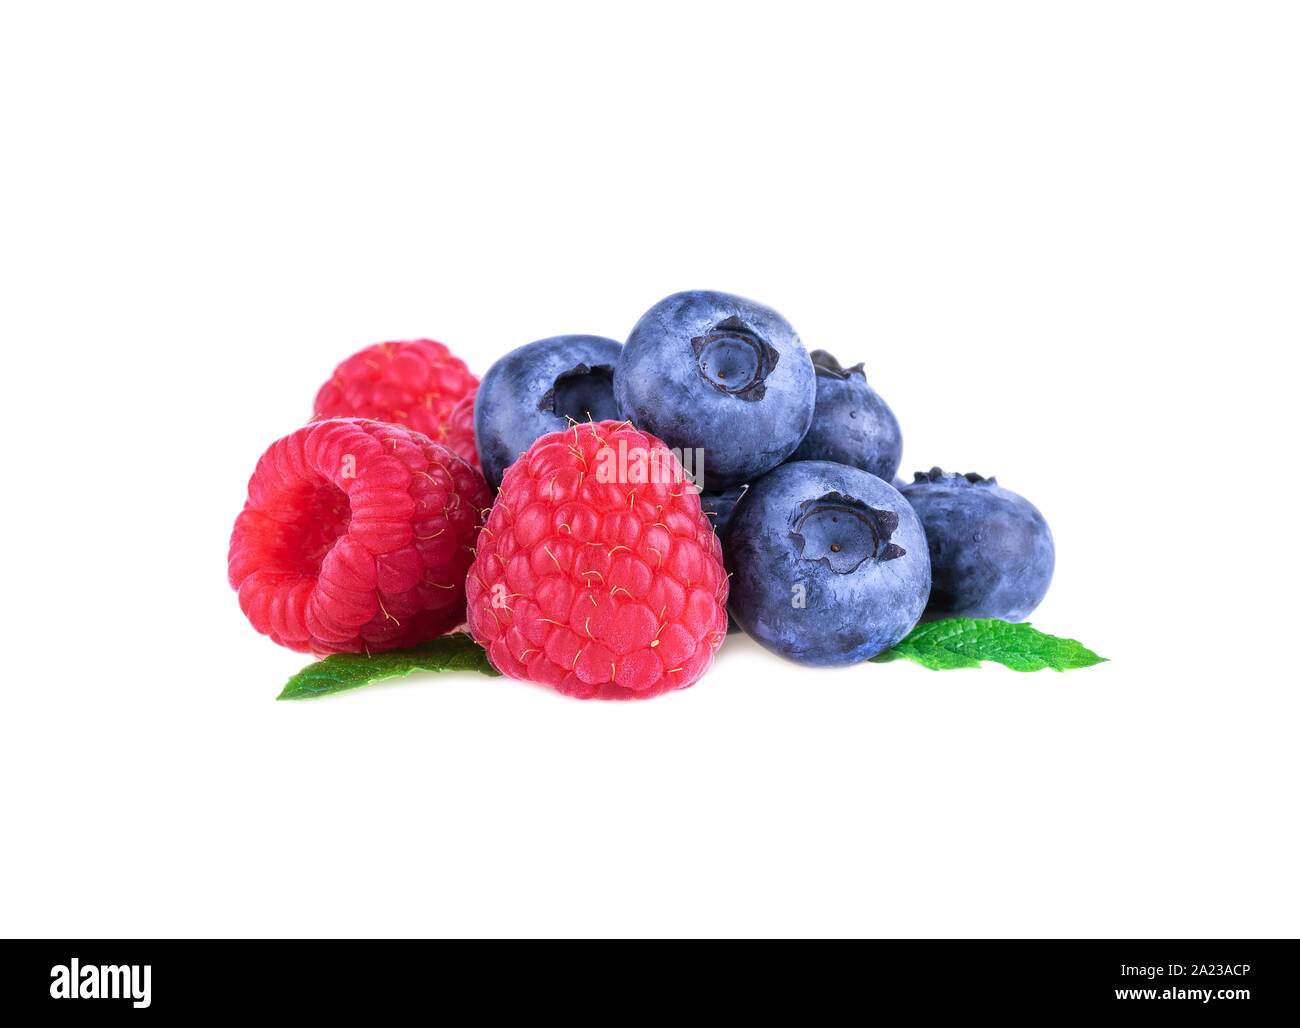 Raspberries with blueberries and mint leaves isolated on white background Stock Photo